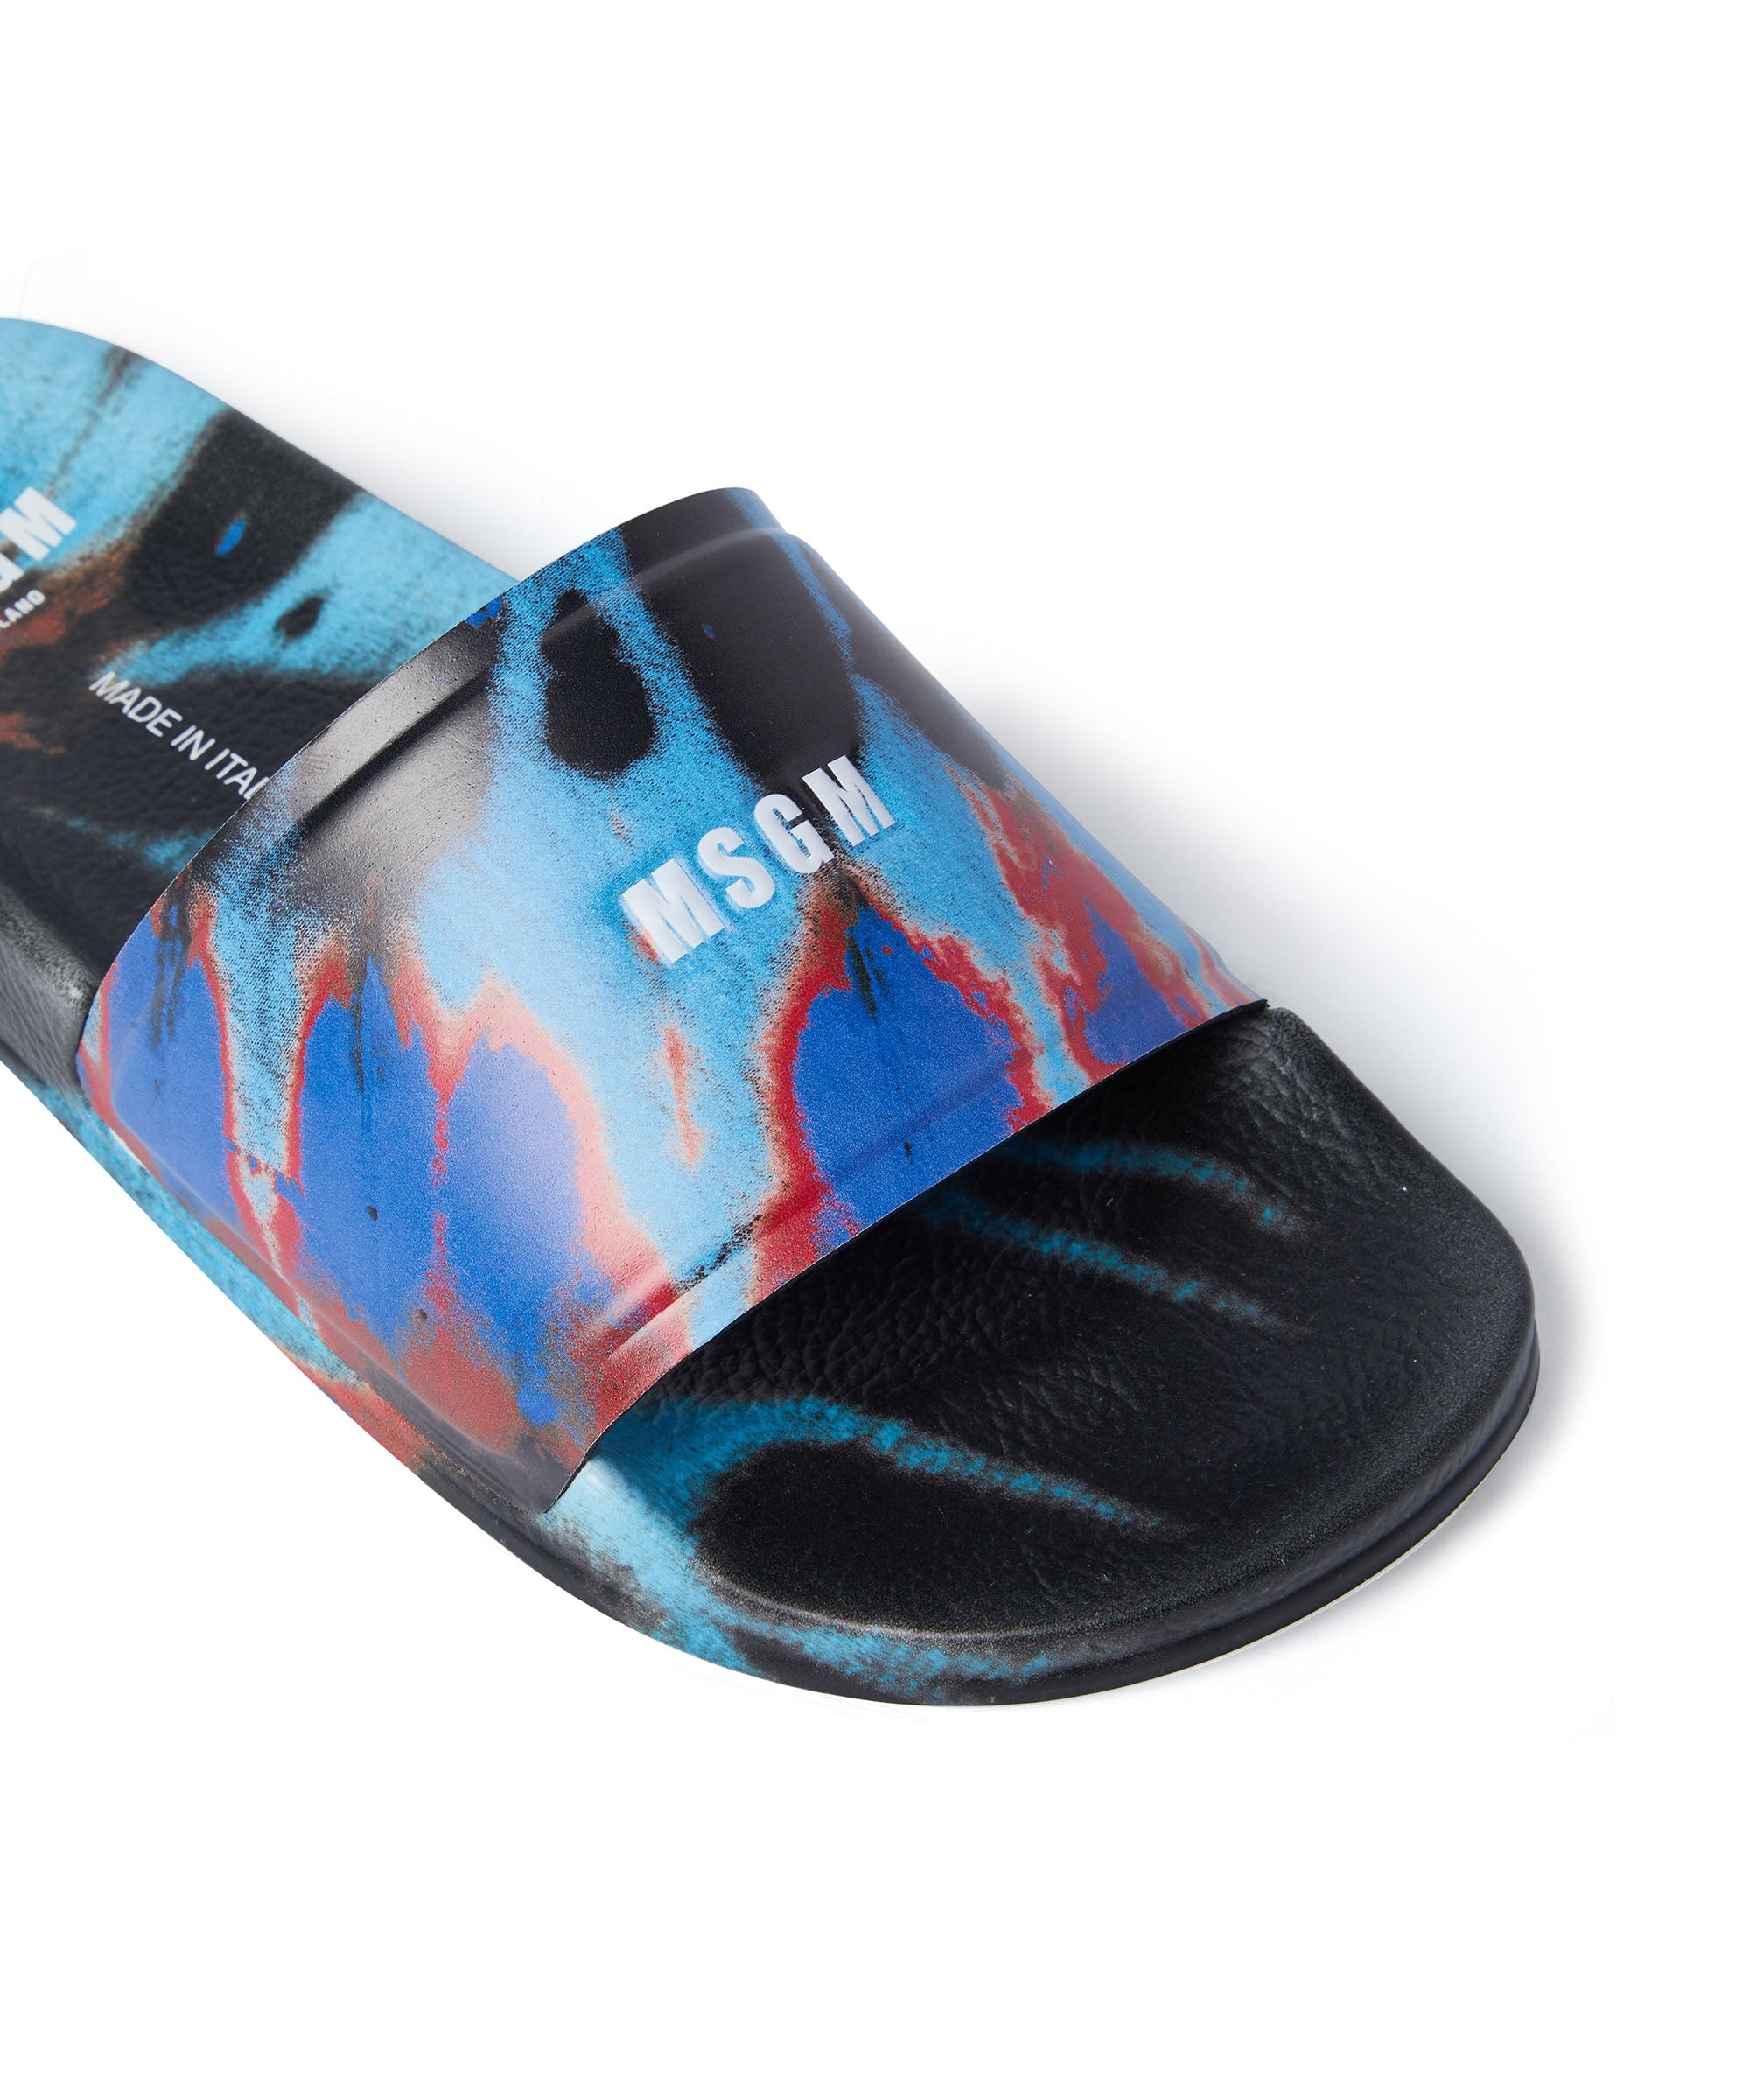 Tie dye pool slippers with MSGM micro logo - 4